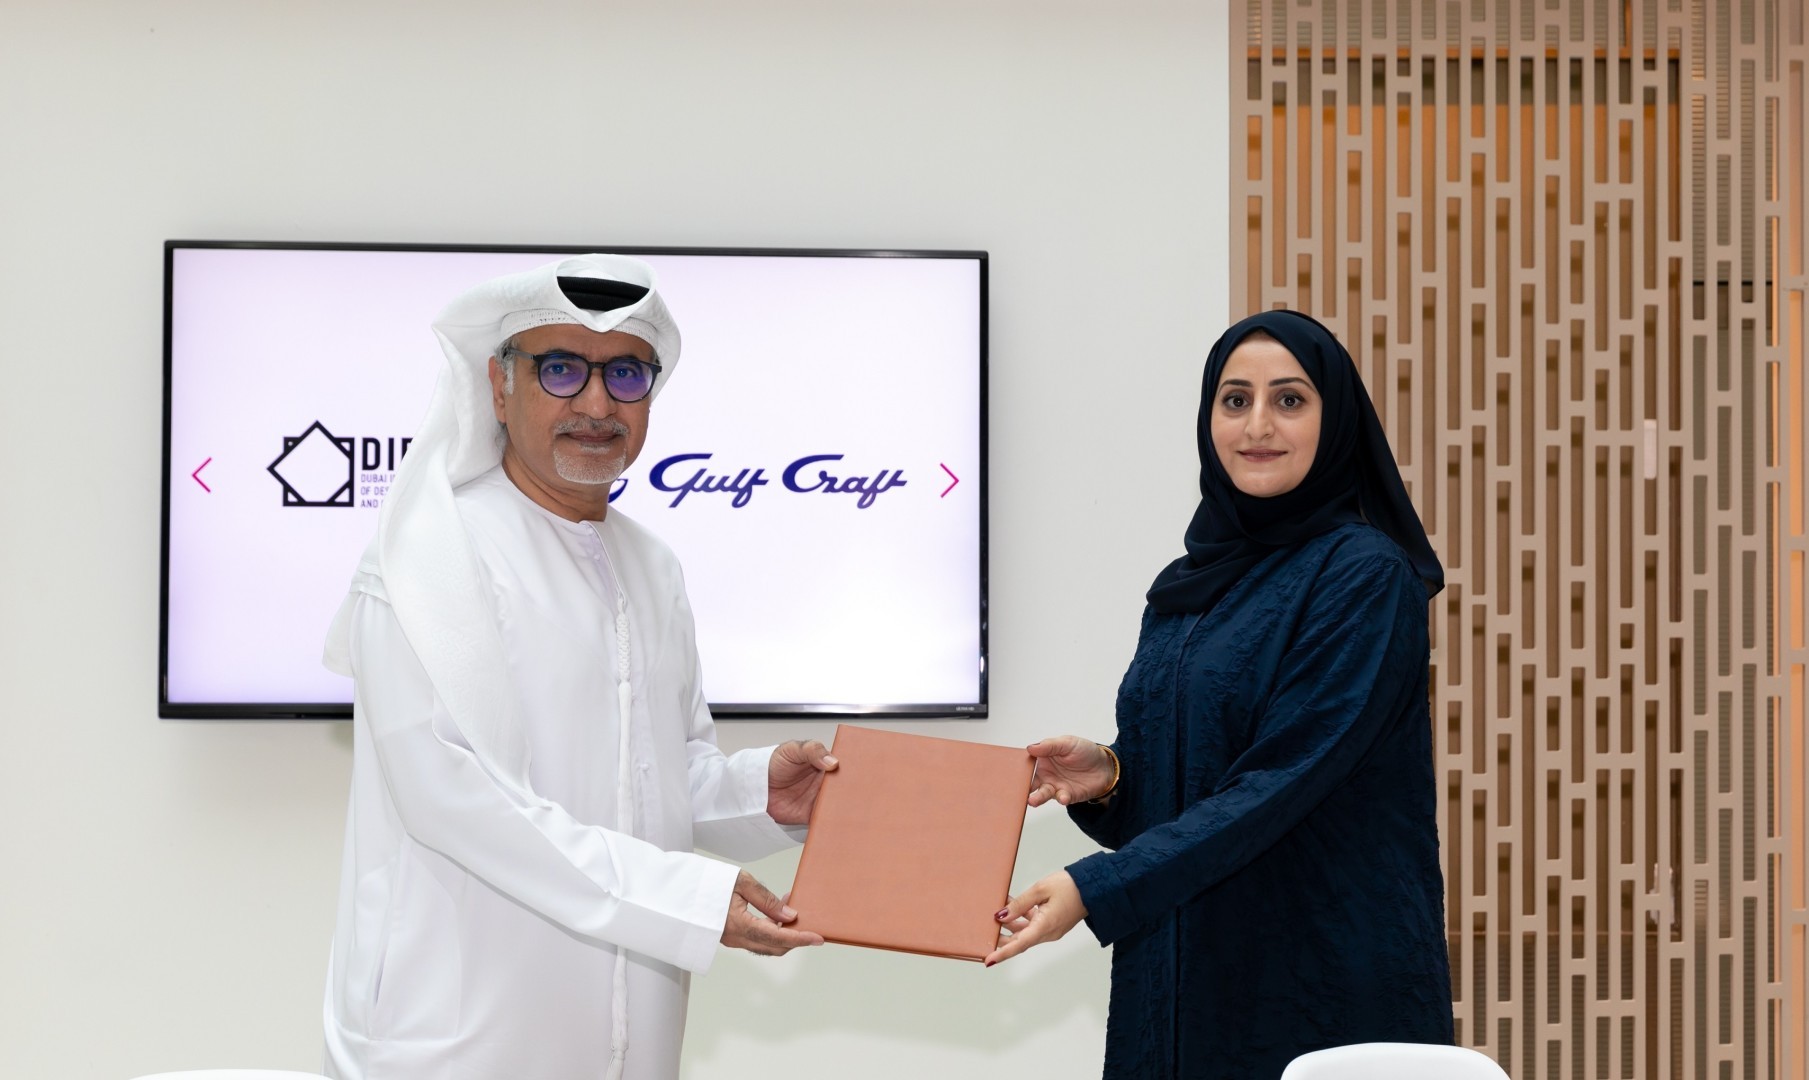 Left to right: Mohammed Abdullah, President of Dubai Institute of Design and Innovation (DIDI) and Abeer Alshaali, Deputy Managing Director, Gulf Craft